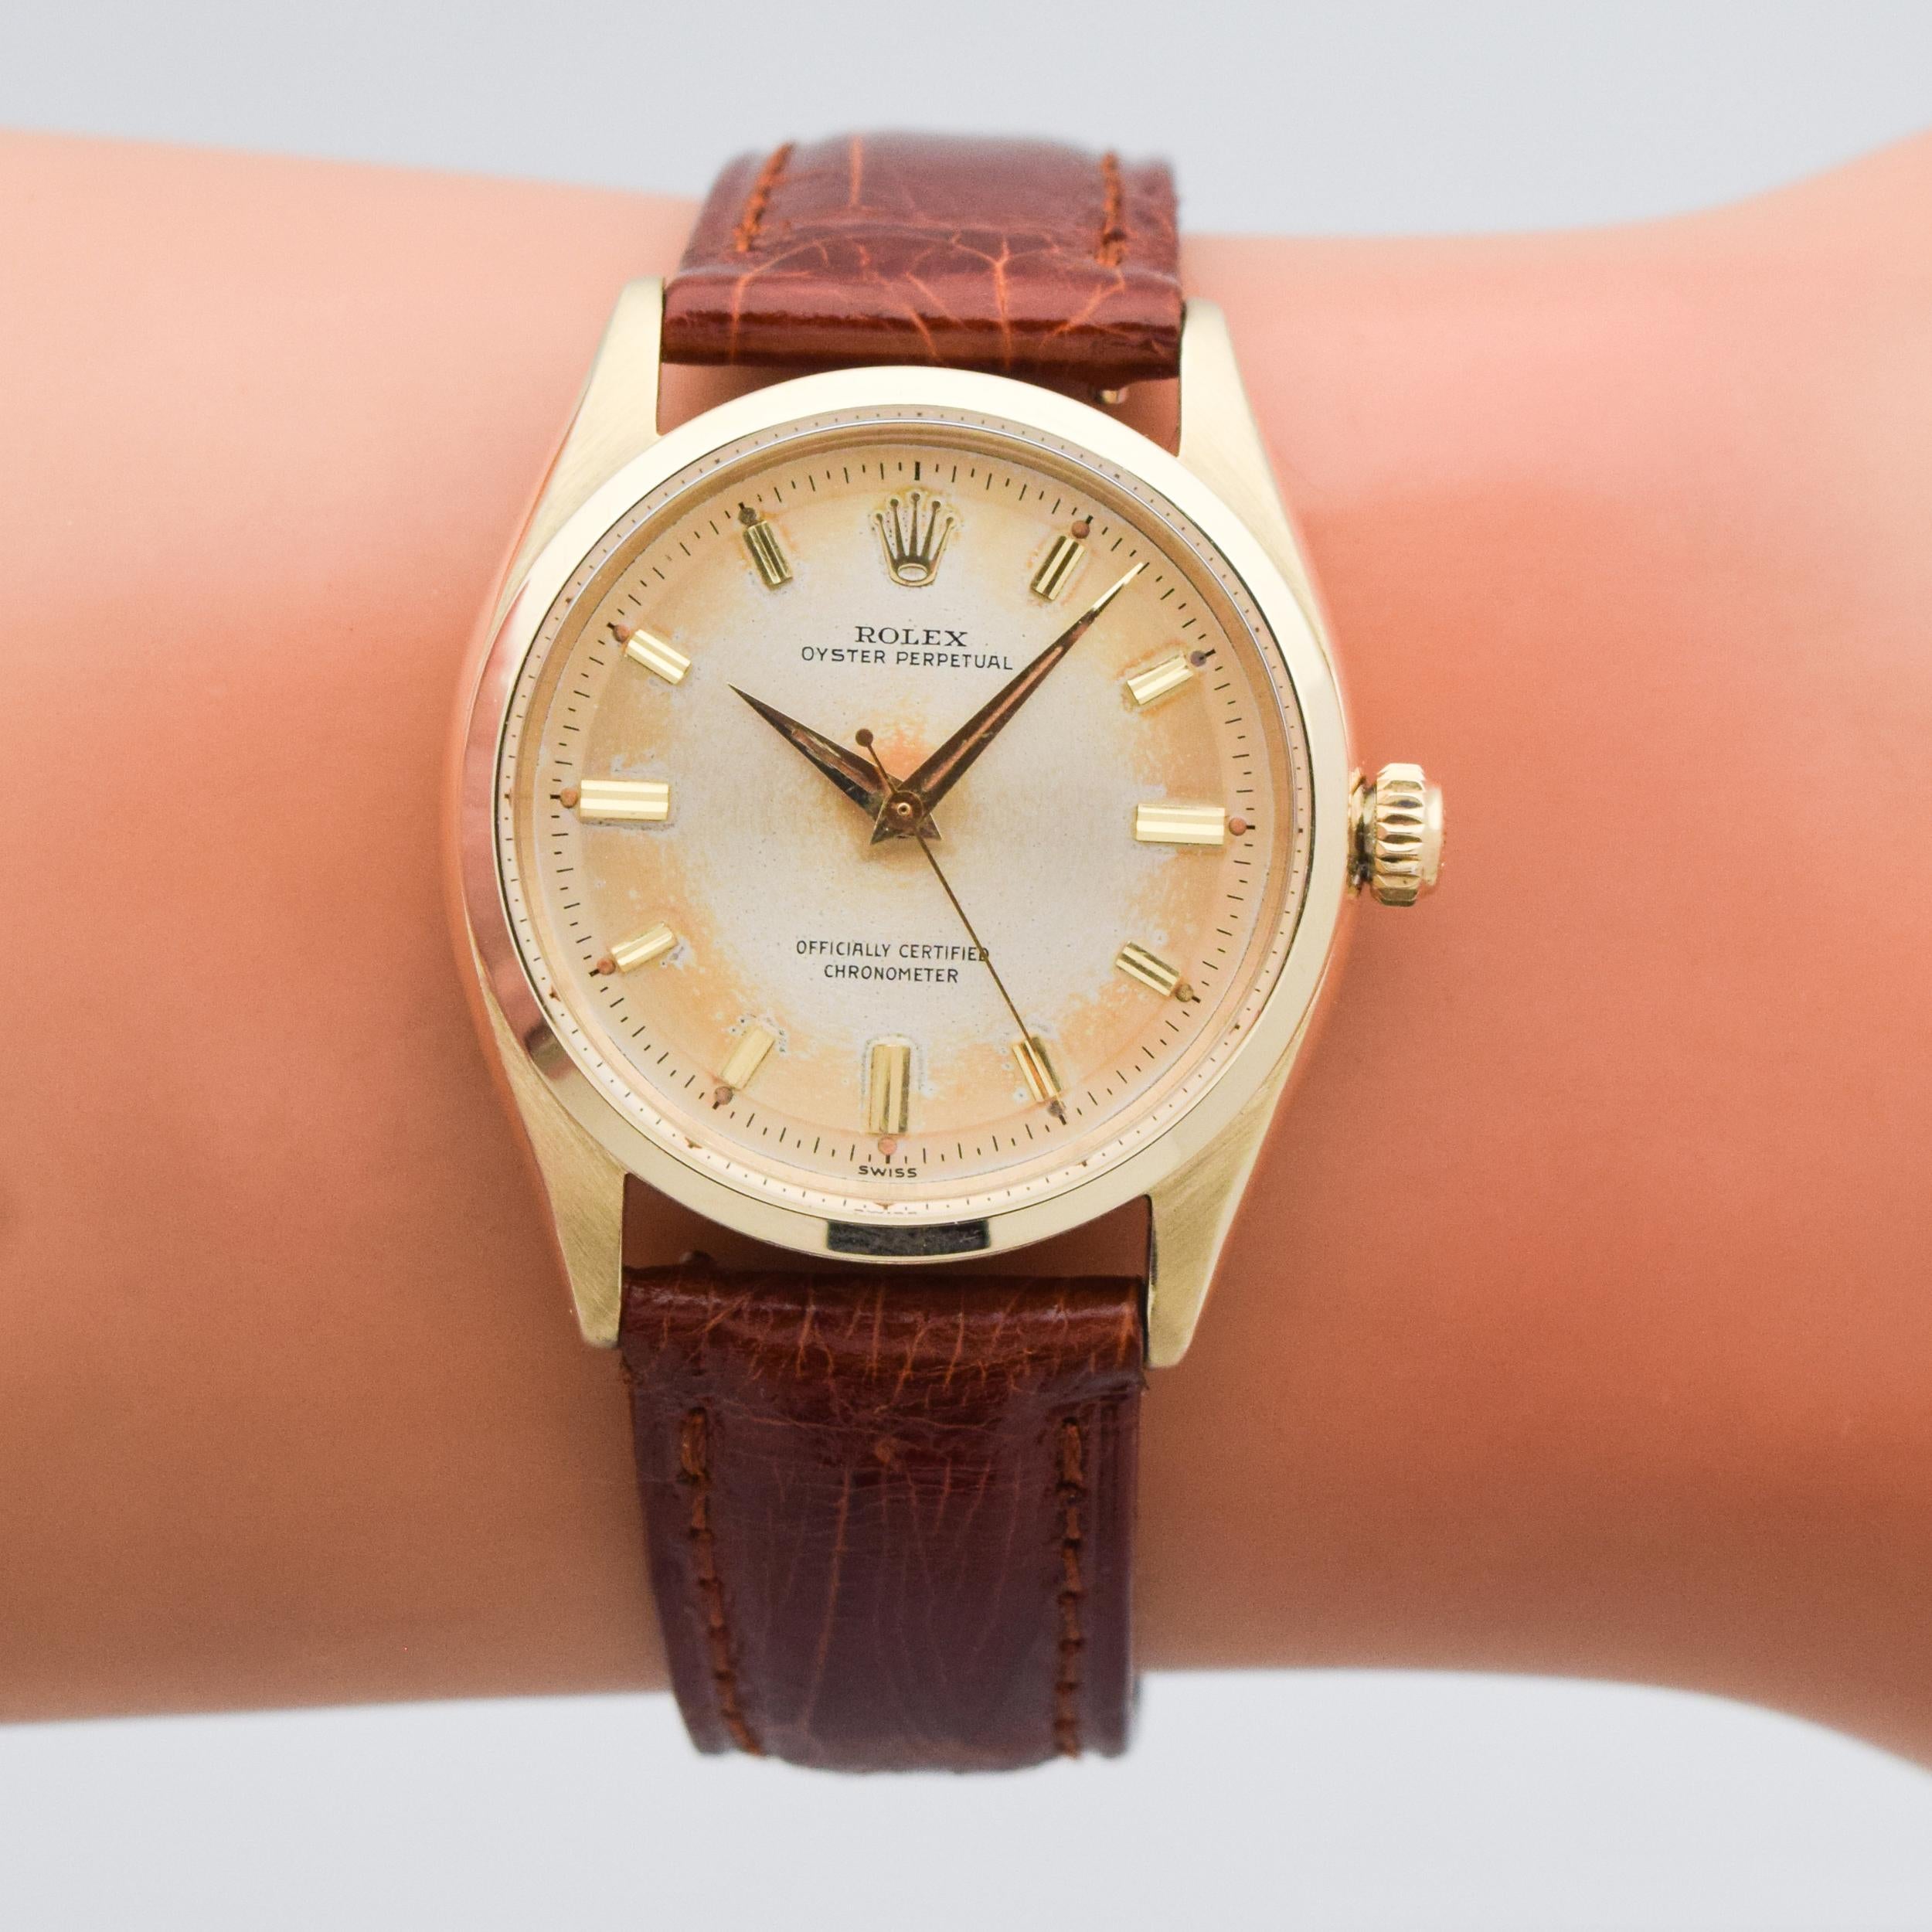 Vintage Rolex Oyster Perpetual 14 Karat Yellow Gold Watch, 1955 For Sale 1